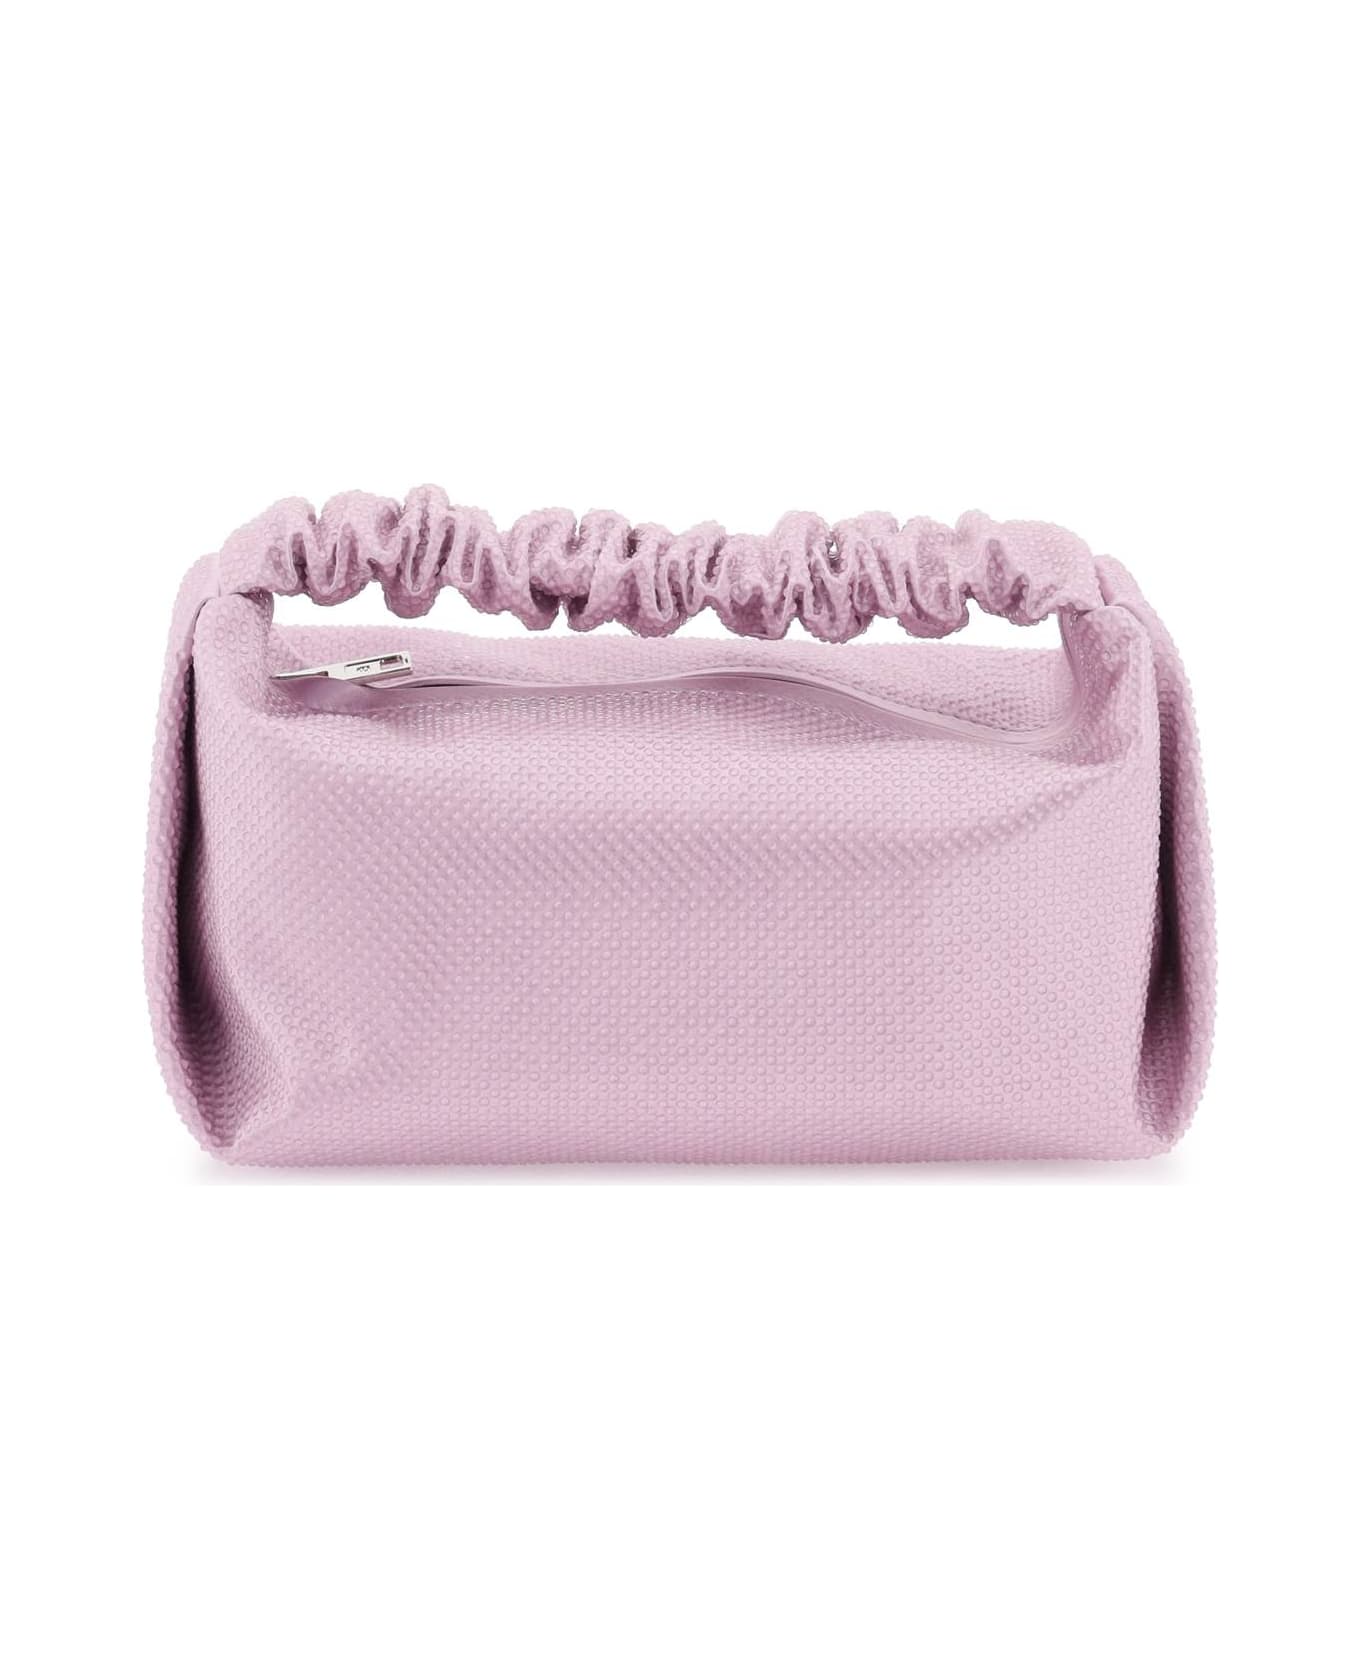 Alexander Wang Scrunchie Mini Bag With Crystals - WINSOME ORCHID (Pink)